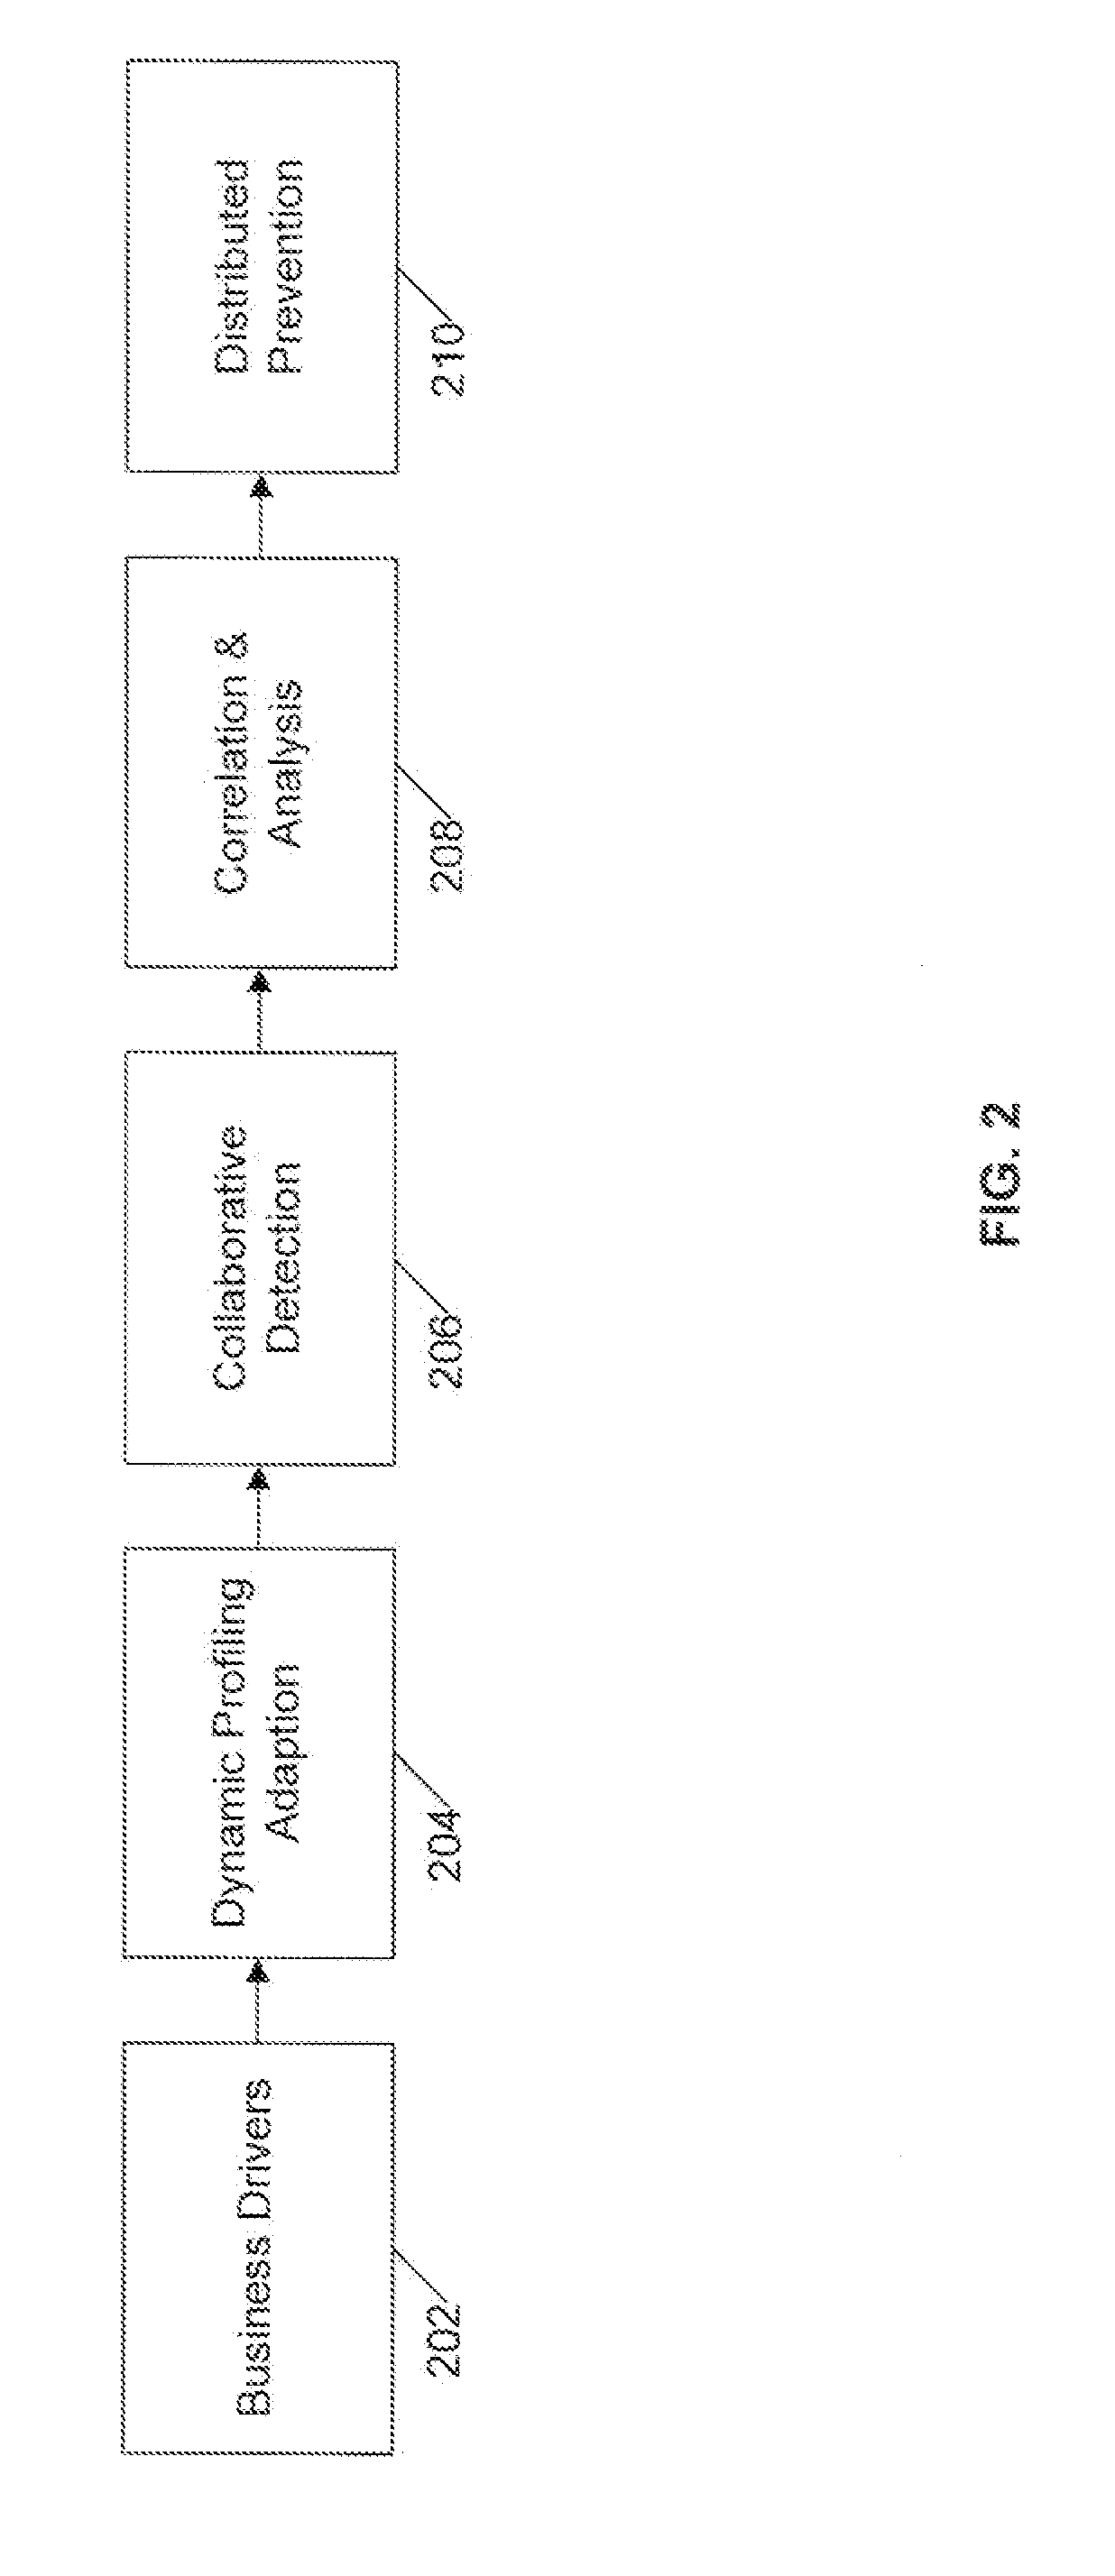 System and method of securing networks against applications threats